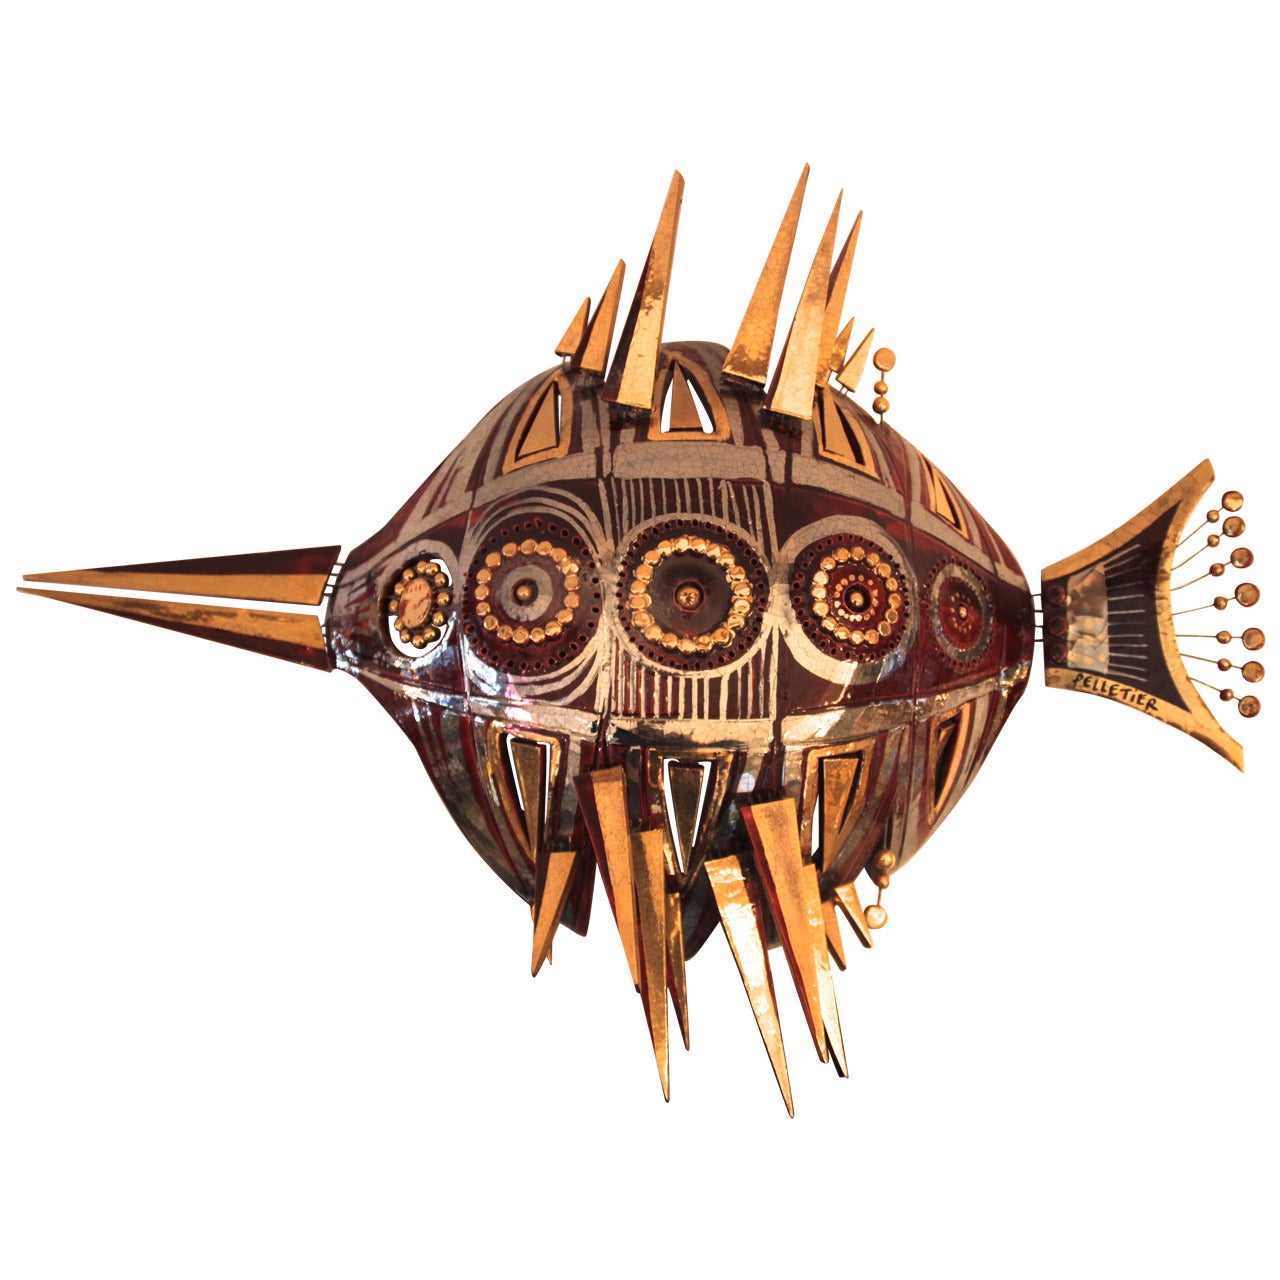 Georges Pelletier, "Fish" Sconce, Signed, circa 1980, France